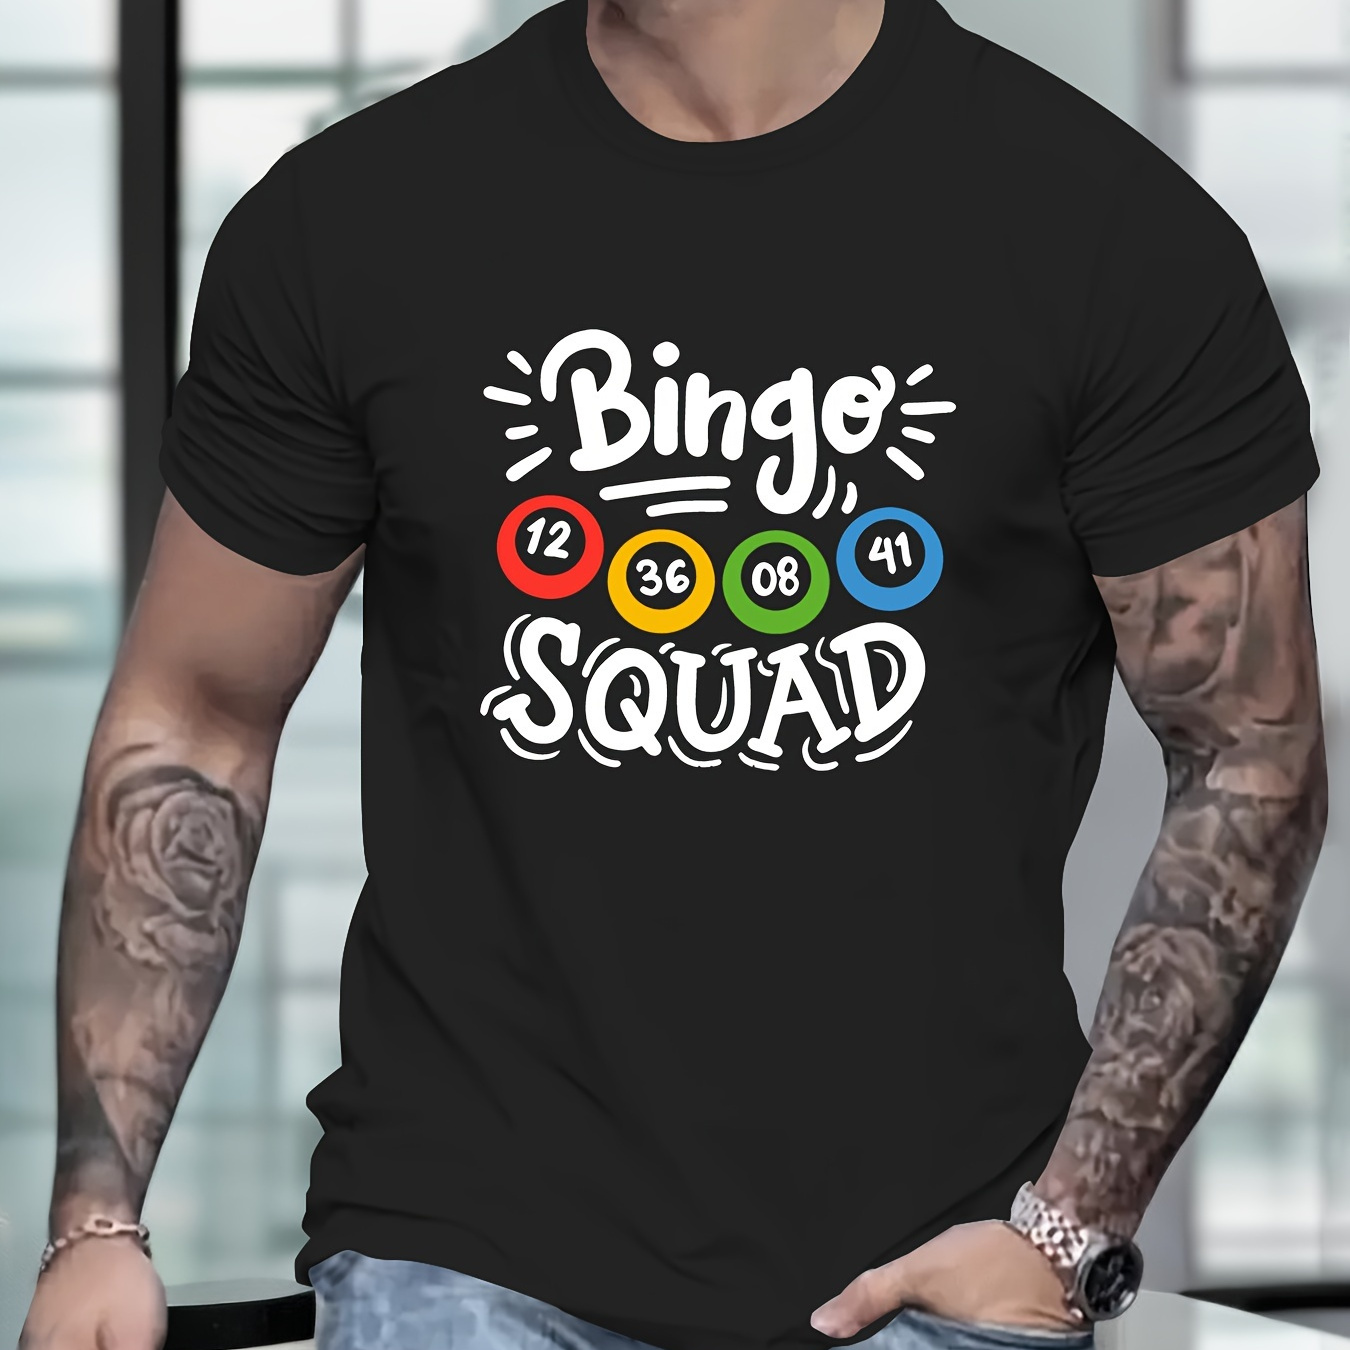 

Bingo Print, Men's Round Crew Neck Short Sleeve, Simple Style Tee Fashion Regular Fit T-shirt, Casual Comfy Breathable Top For Spring Summer Holiday Leisure Vacation Men's Clothing As Gift